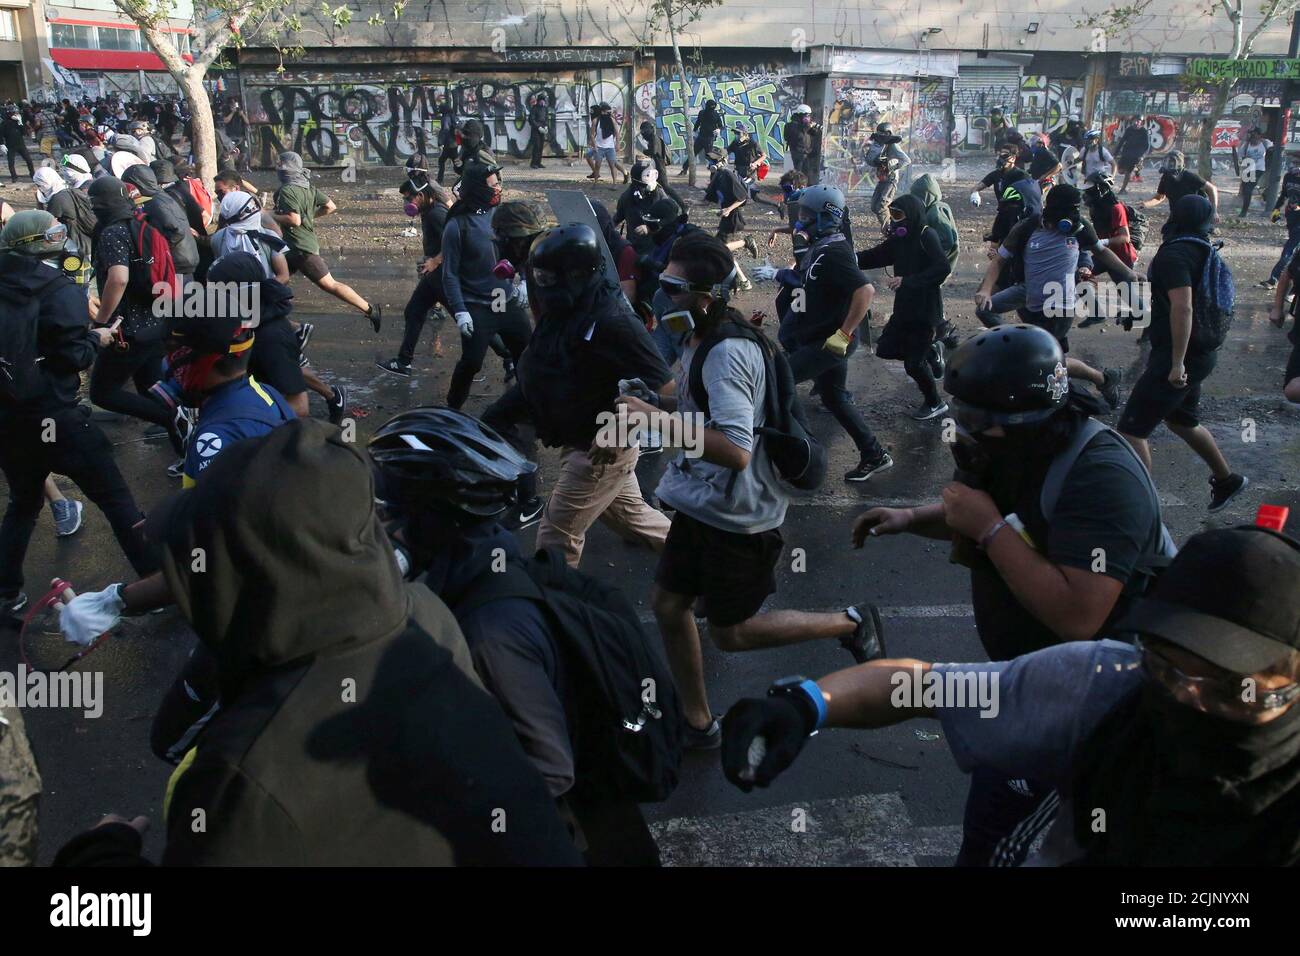 Demonstrators run as they clash with riot police during anti-government protests in Santiago, Chile January 24, 2020. REUTERS/Edgard Garrido Stock Photo